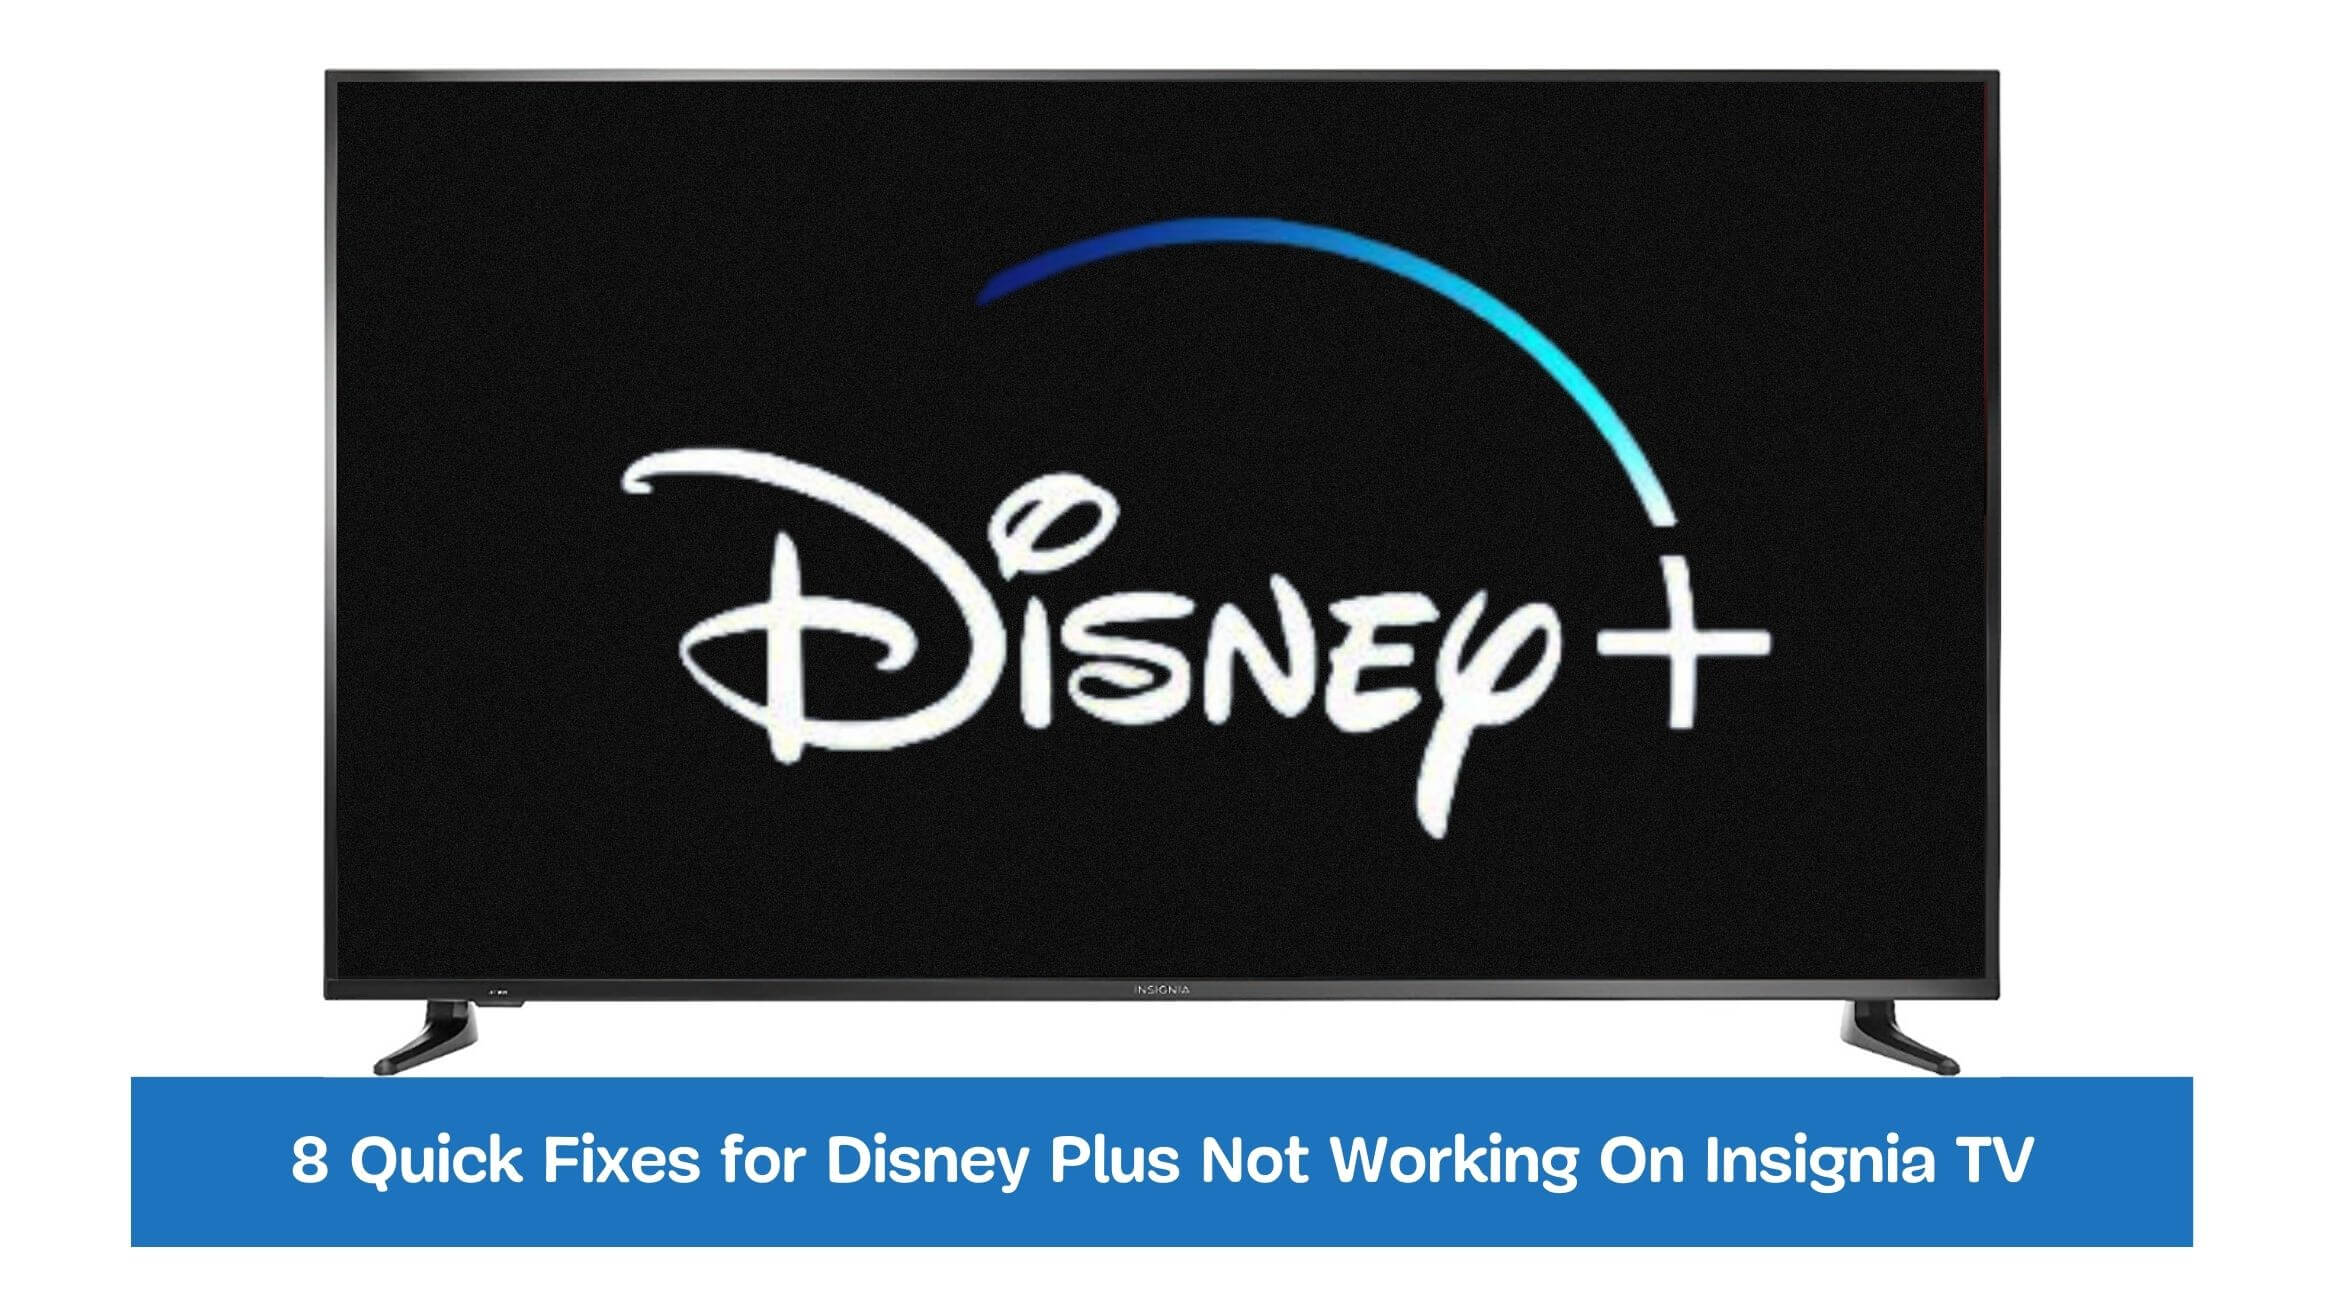 8 Quick Fixes for Disney Plus Not Working On Insignia TV